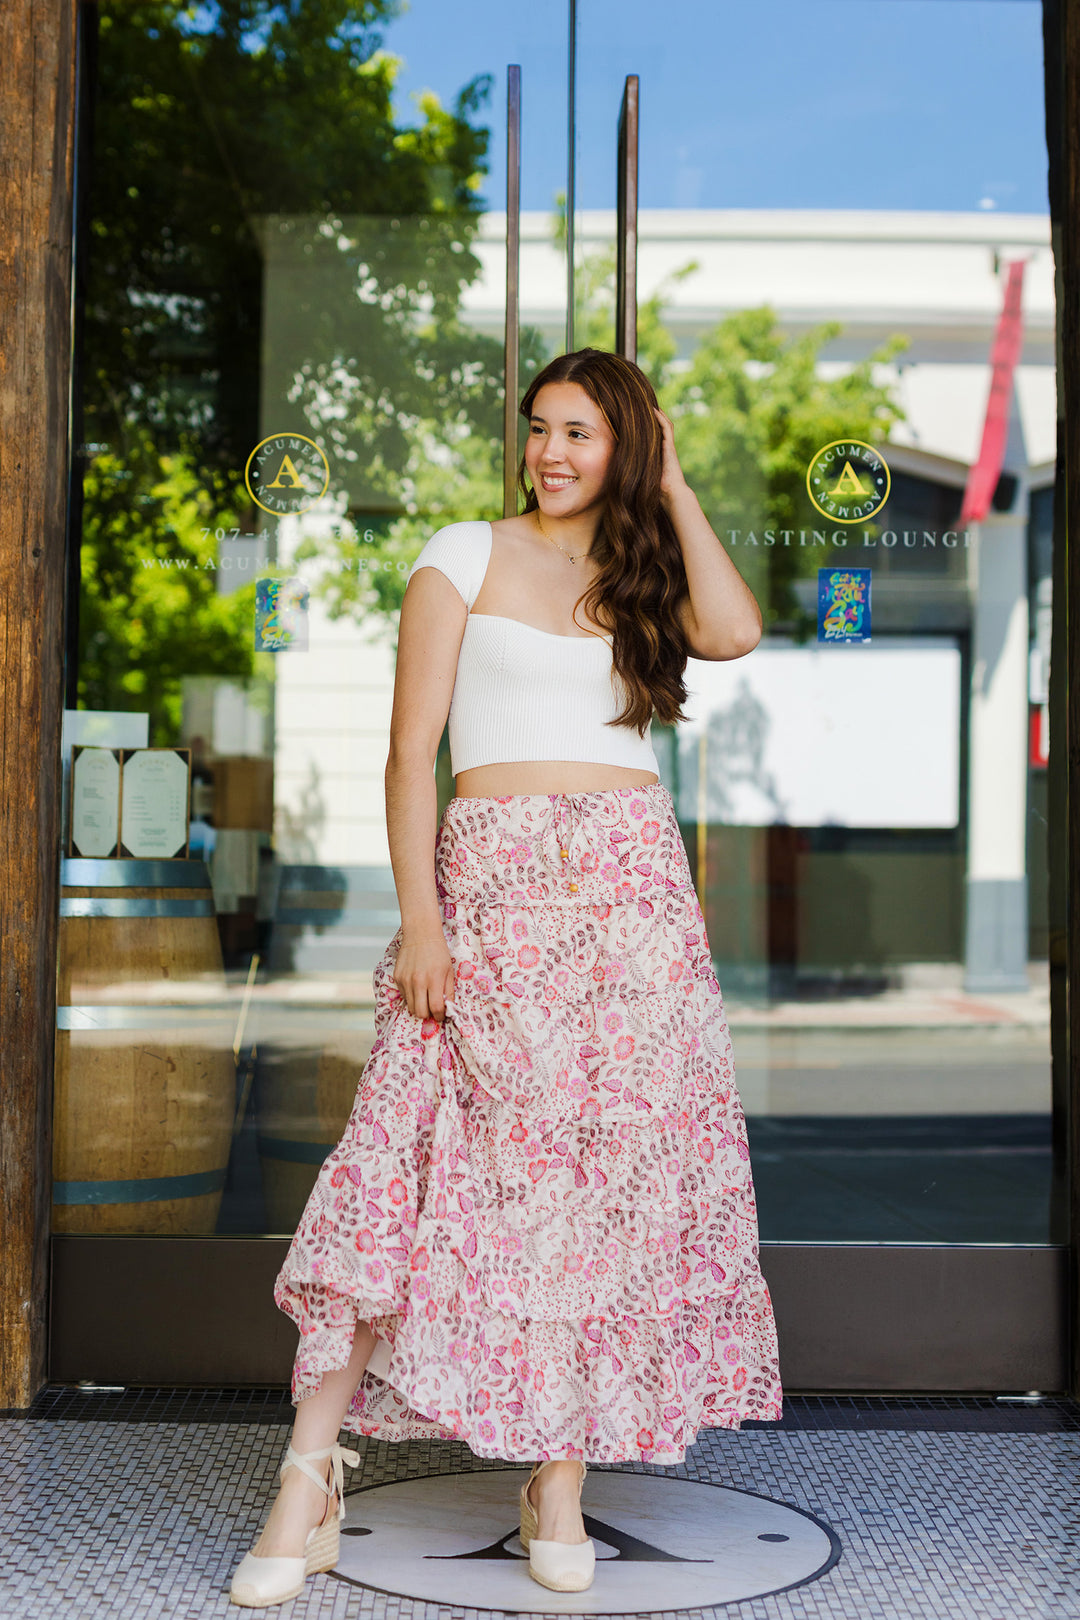 The Blaire Floral Maxi Skirt